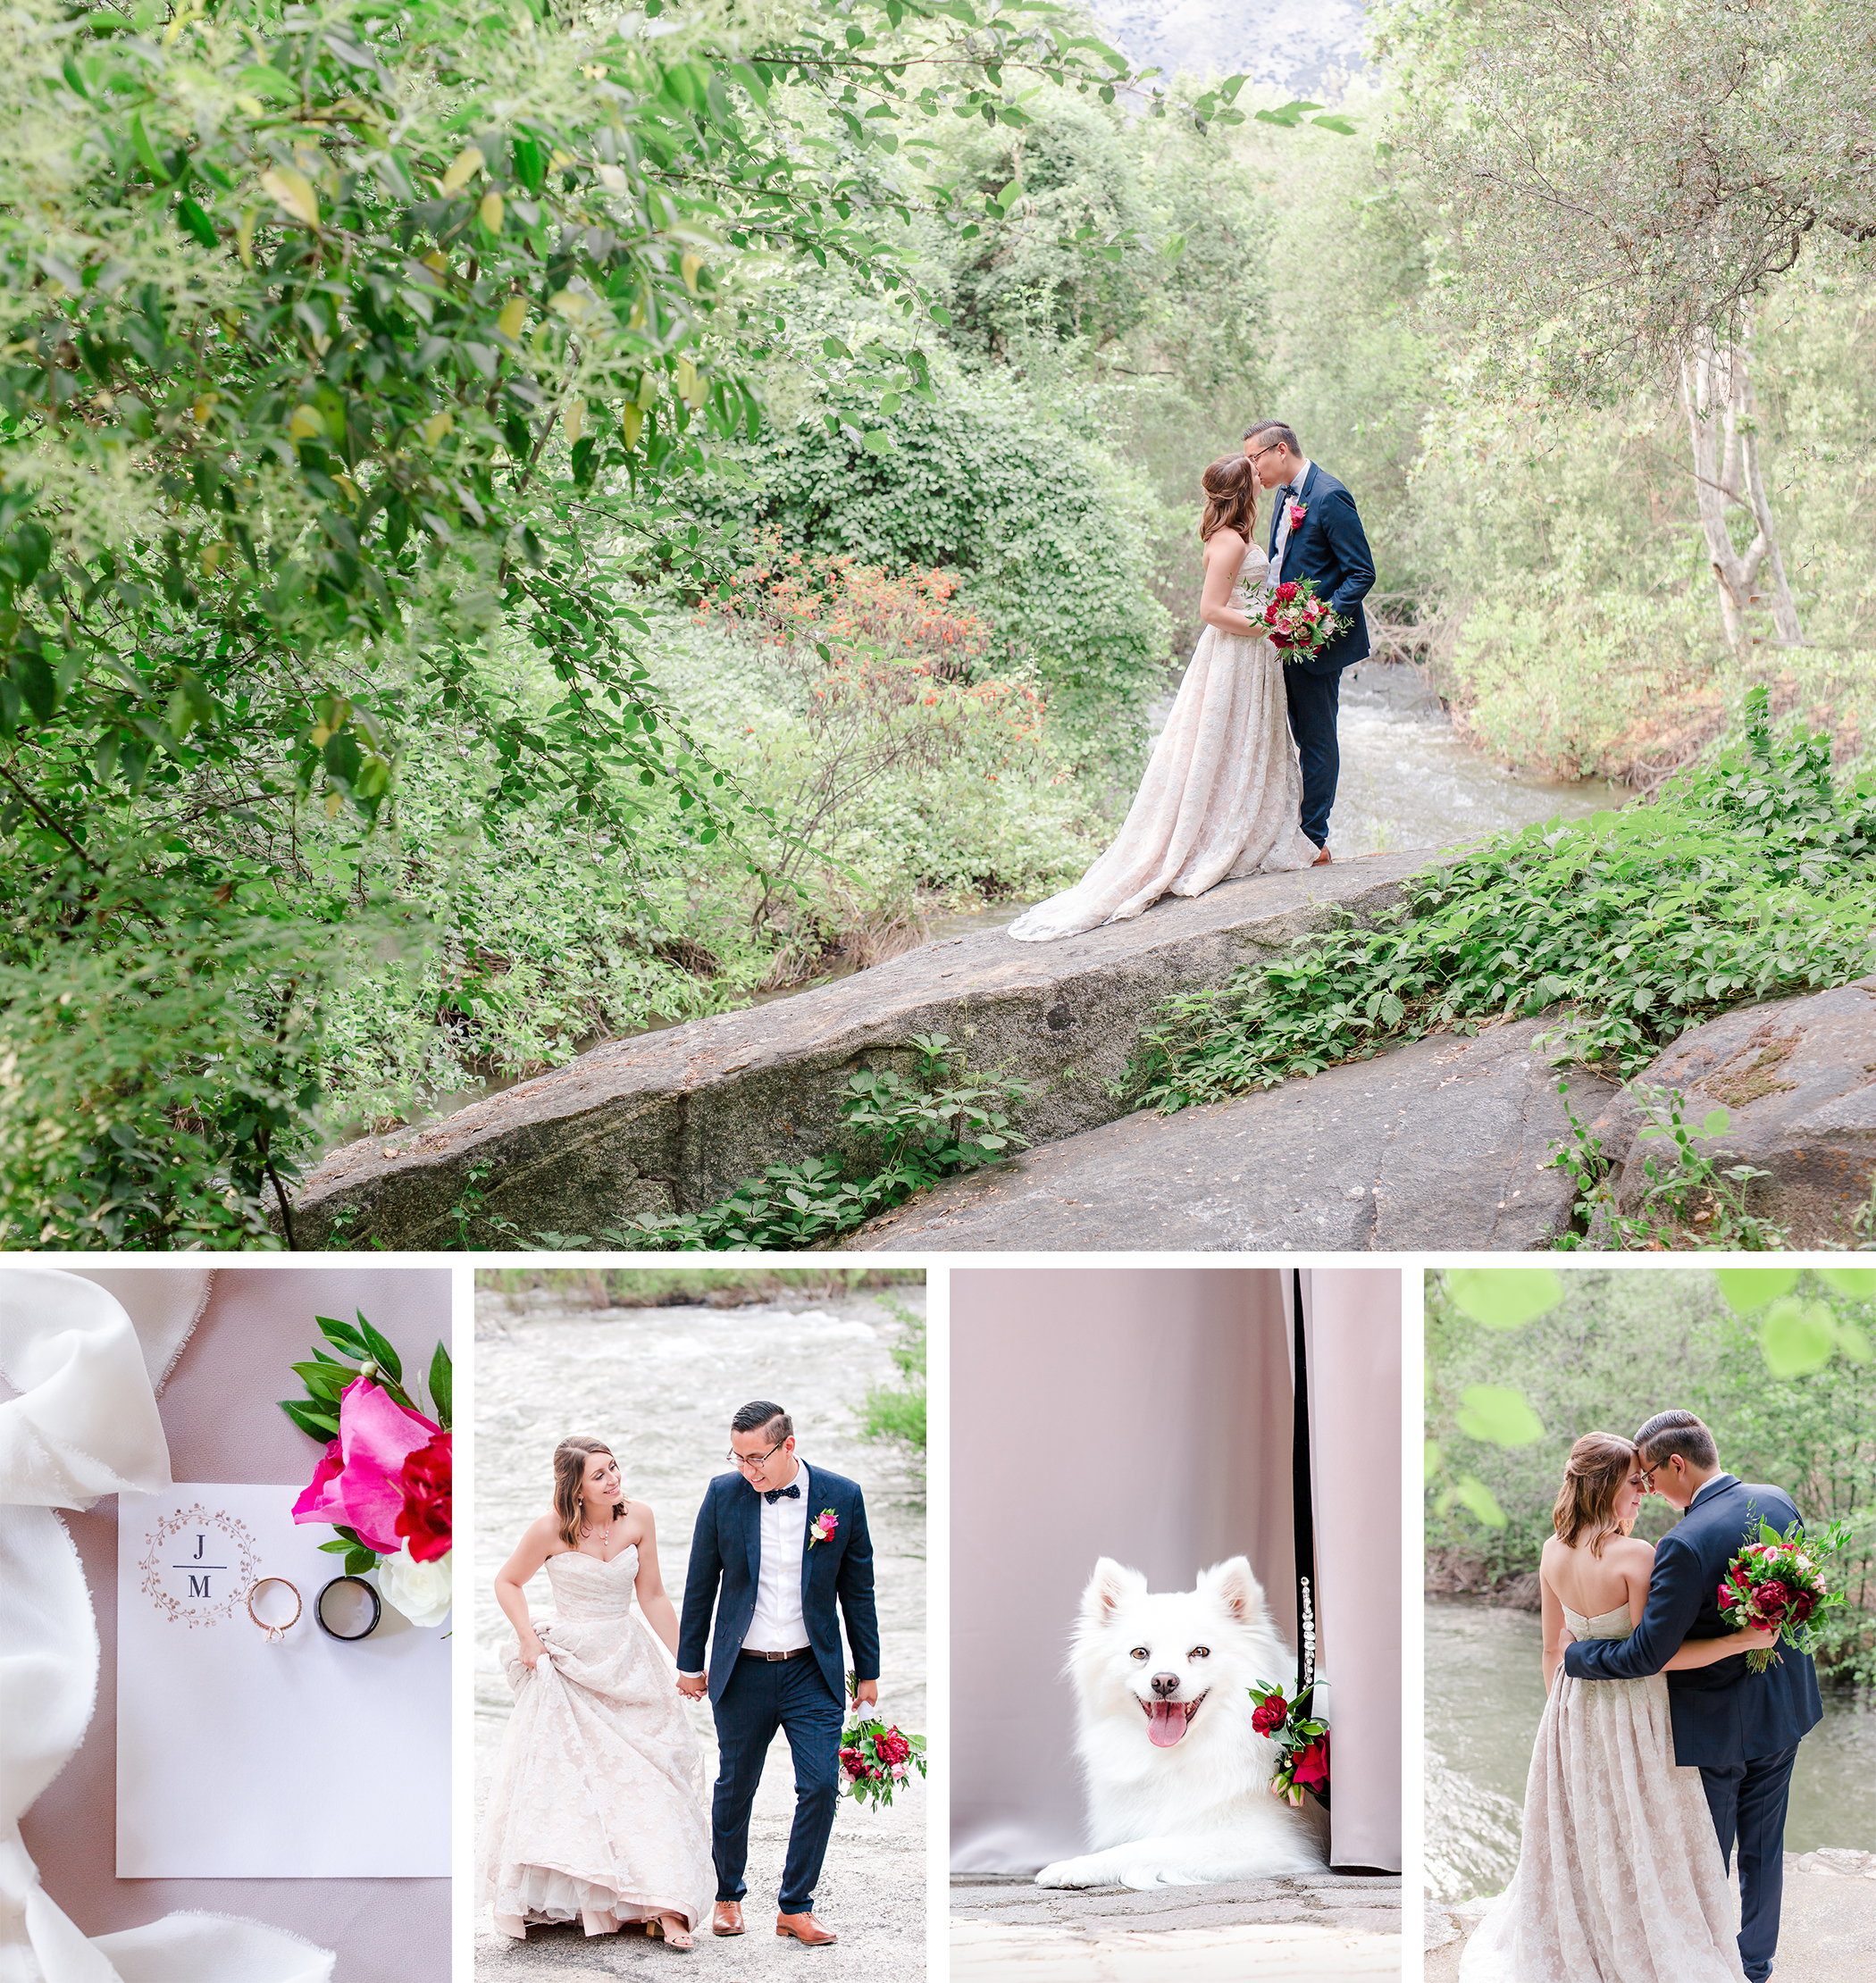 Blog header Picture | Mountain side Picture of Bride and Groom. Pictures with rings, white dog ring bearer, and more bride and groom pictures | The White Horse Inn Wedding Photos | Three Rivers, CA | Laura Tavarez | Melissa and Juan